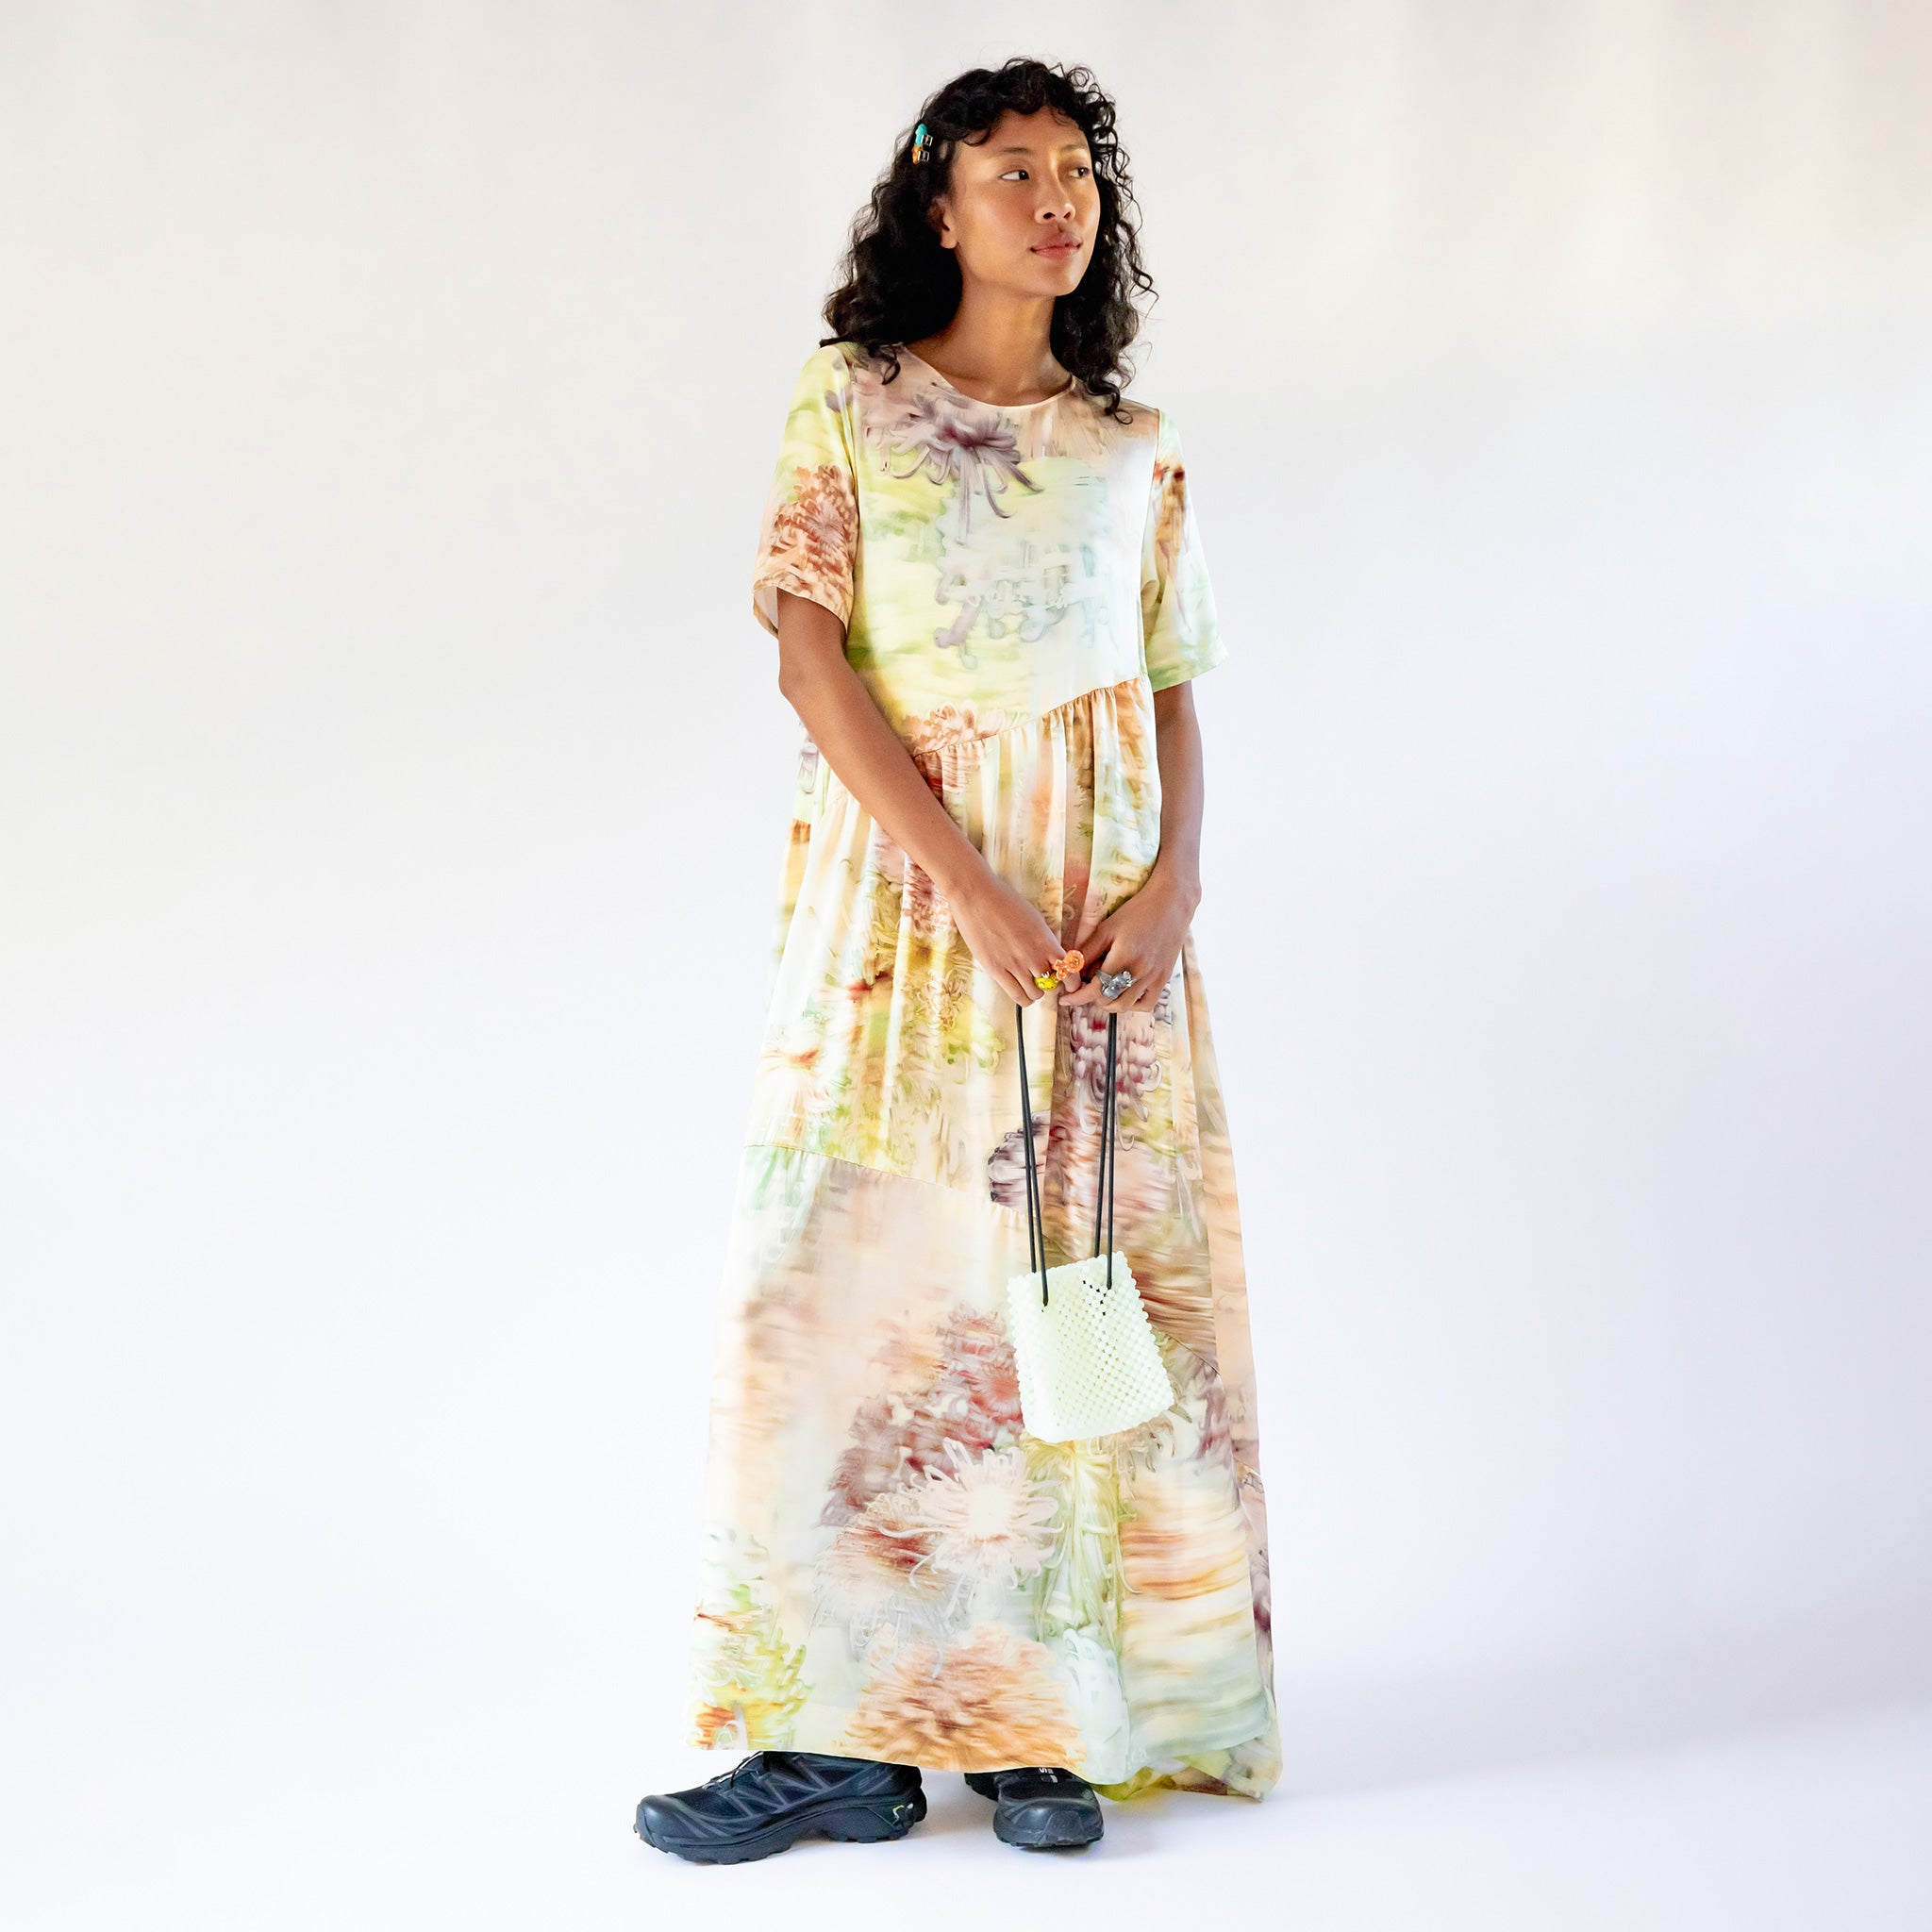 Front view of a model wearing the Ritual Dress - Light Chrysanthemum, a full length short-sleeved printed dress with a crew neck and large paneled pieces.